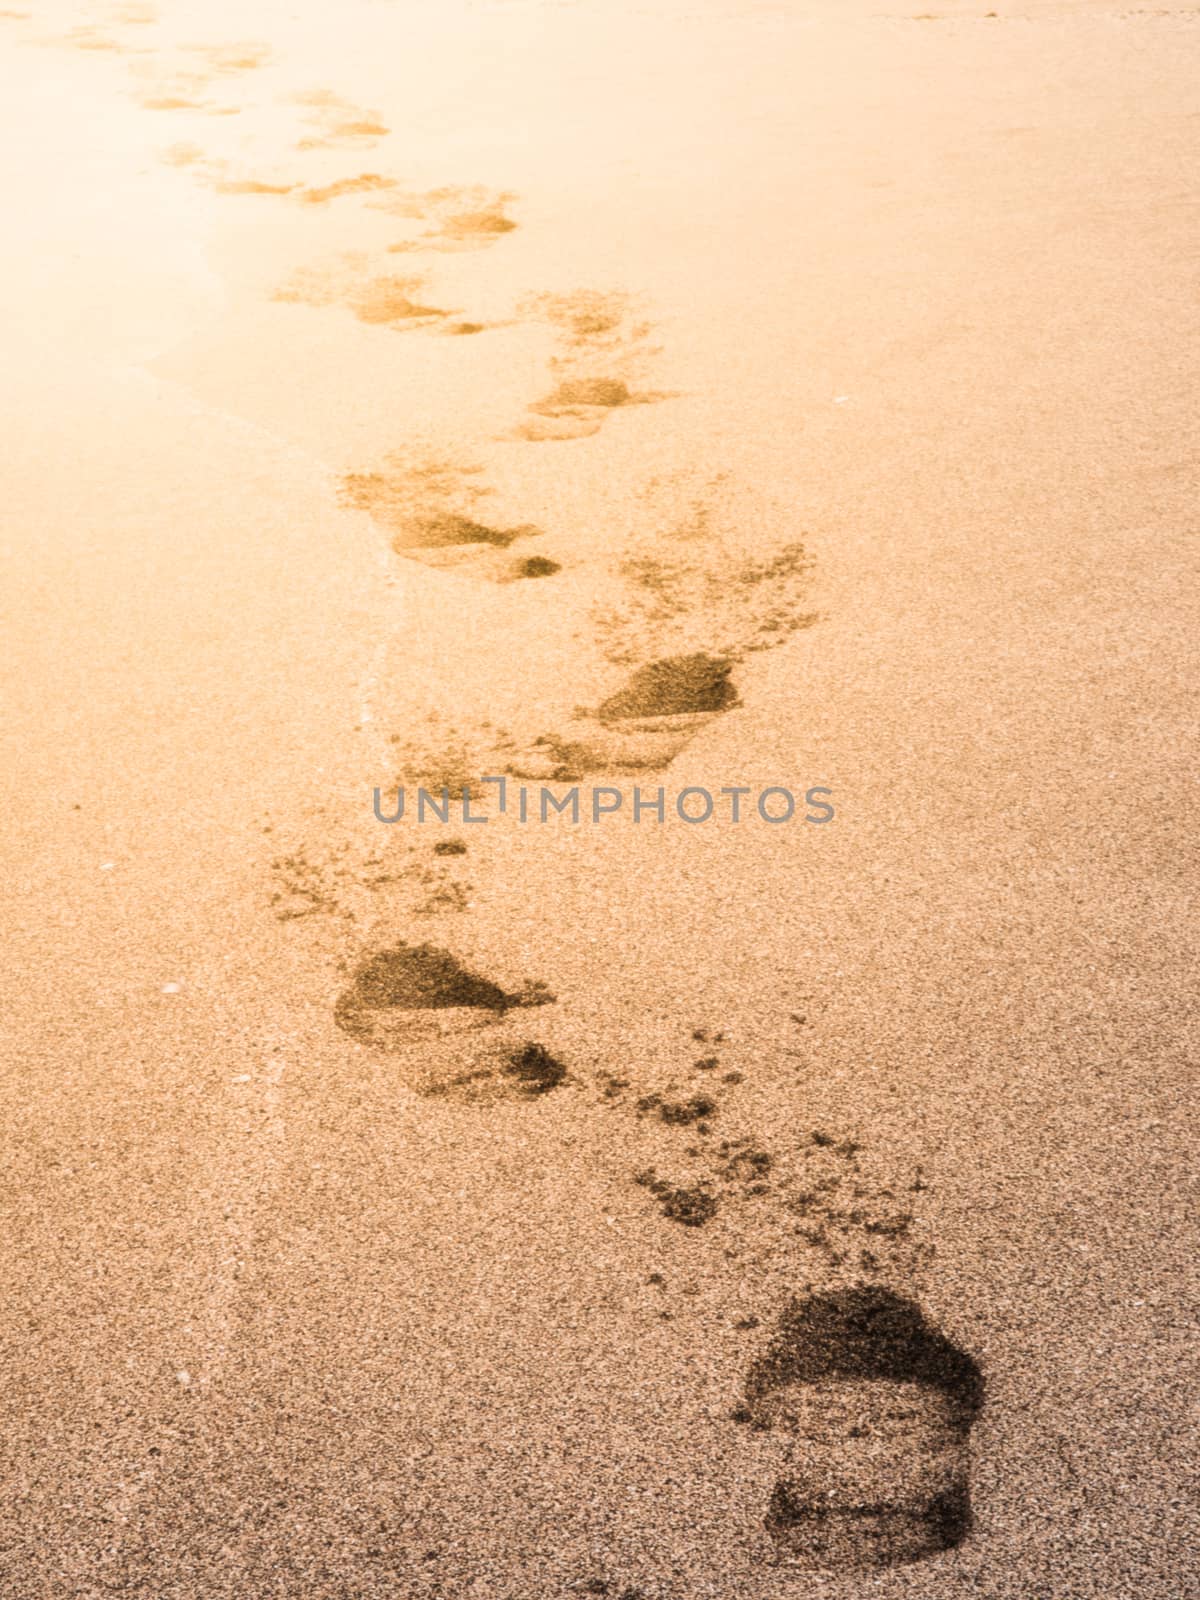 Human shoe prints in a sandy beach by pyty